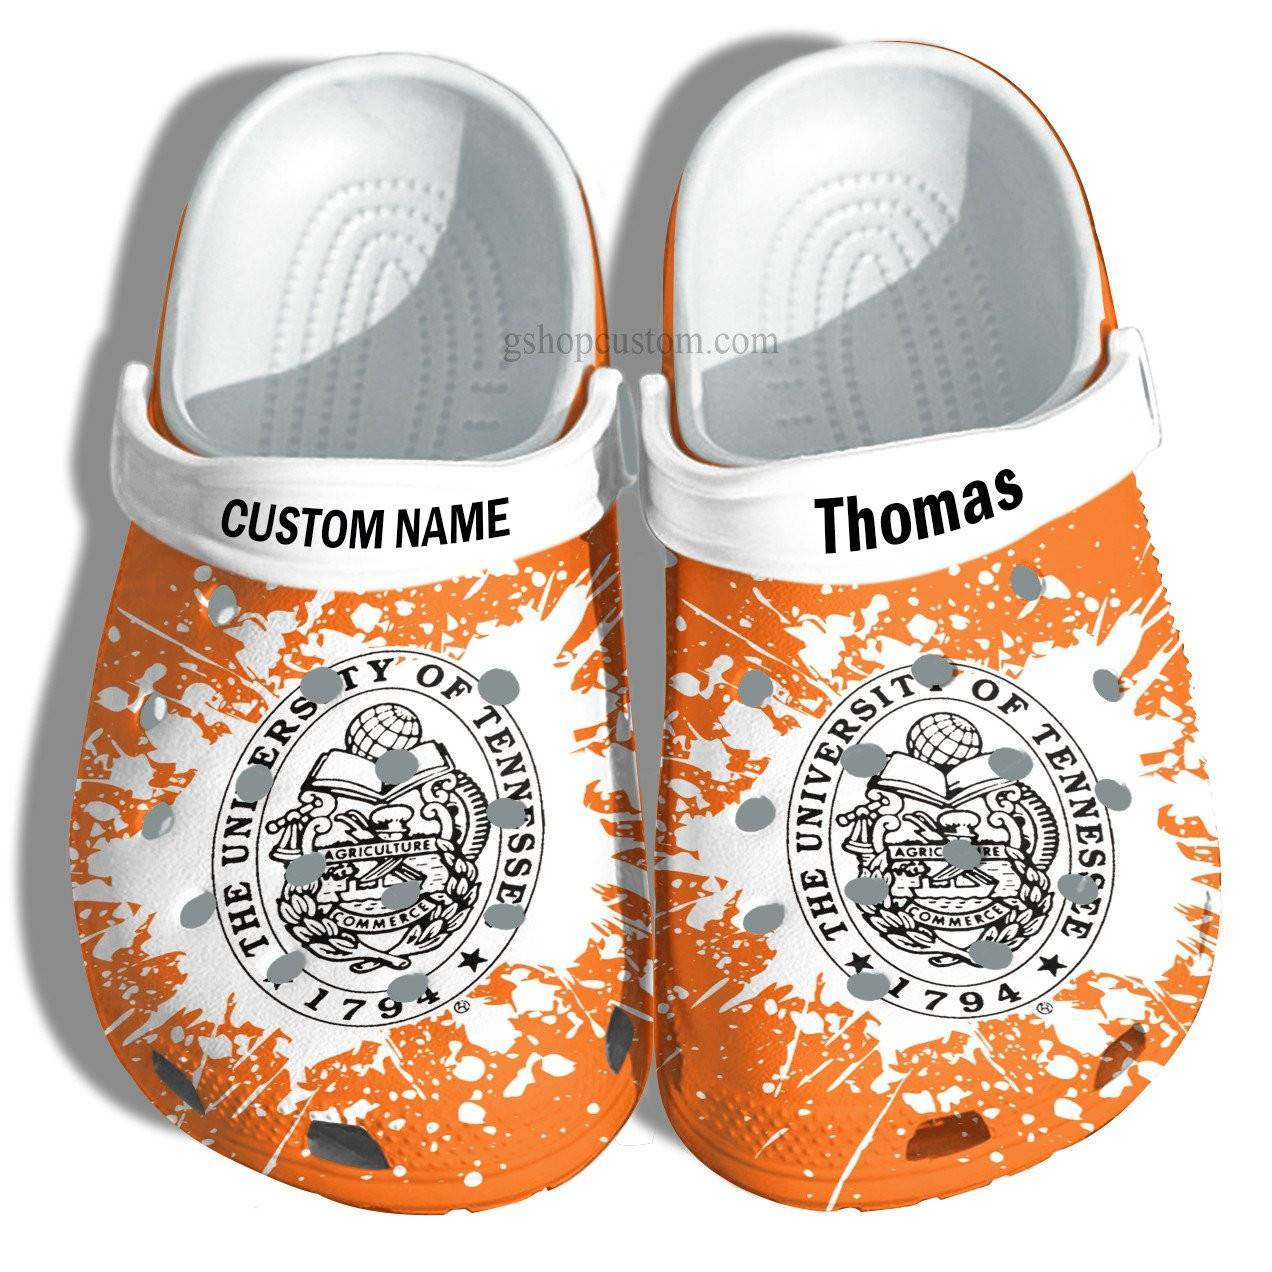 The University Of Tennessee Graduation Gifts Croc Shoes Customize – Admission Gift Crocss Shoes